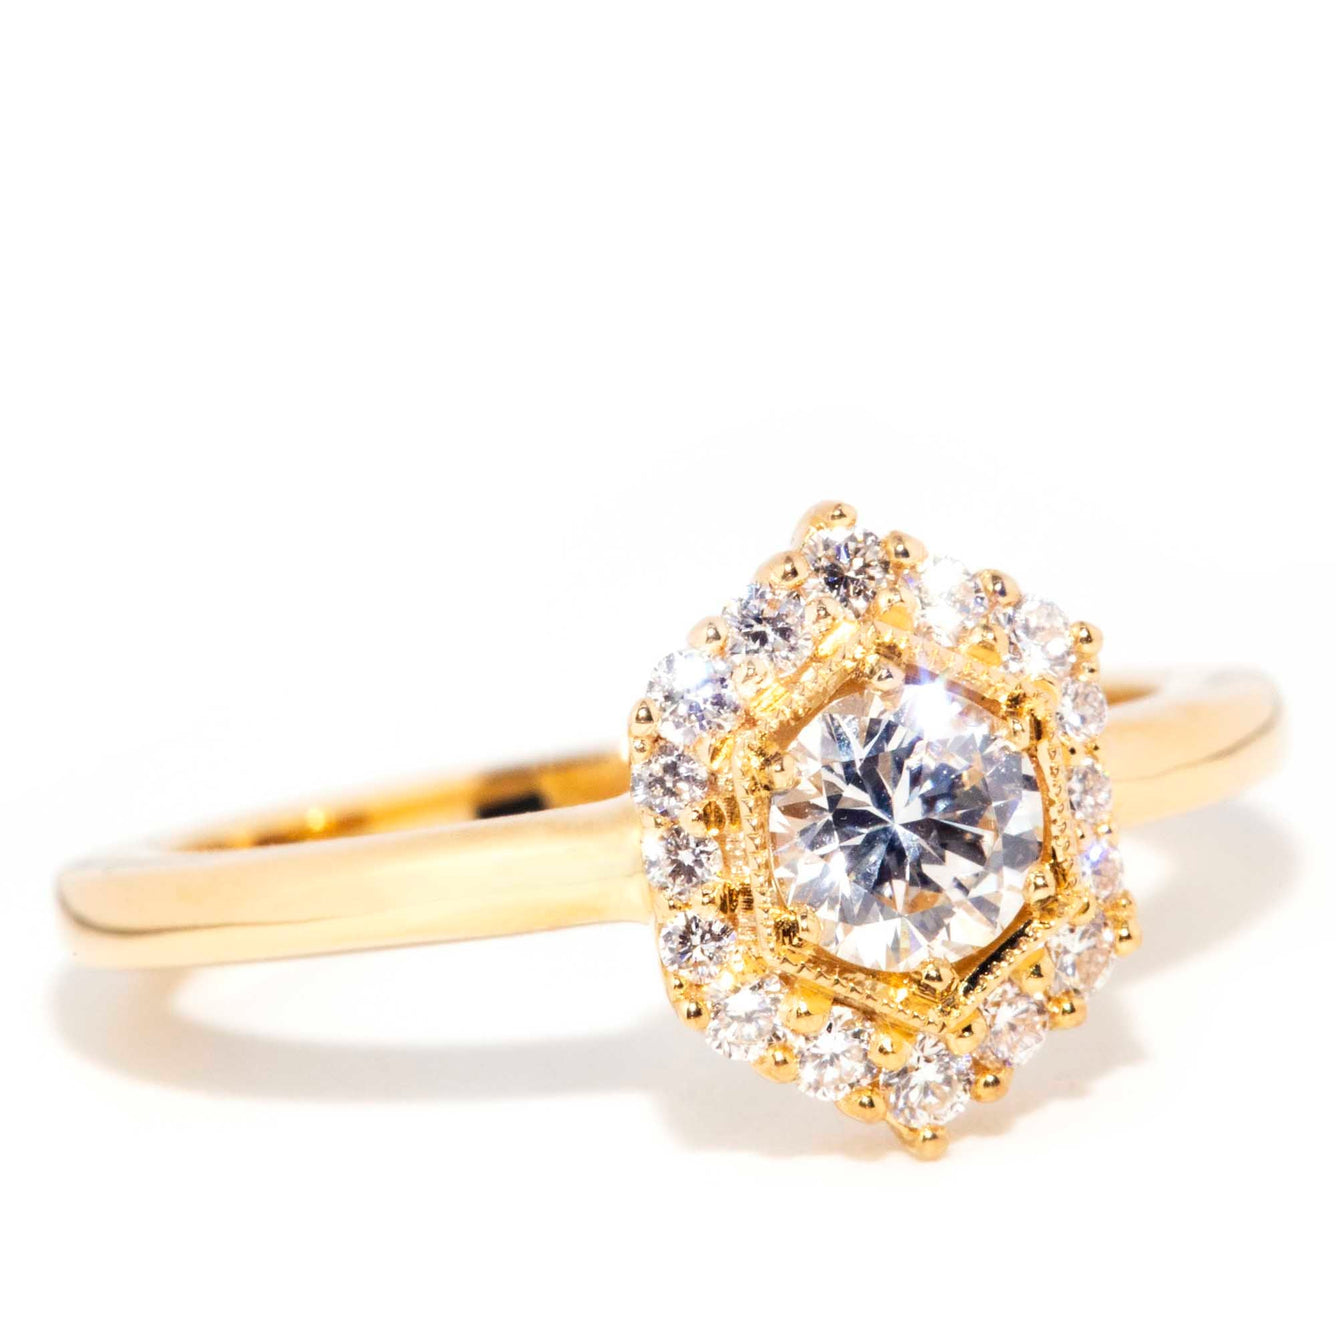 QUINN Contemporary 18ct Yellow Gold Diamond Hexagonal Halo Ring* OB Gemmo Rings Imperial Jewellery 